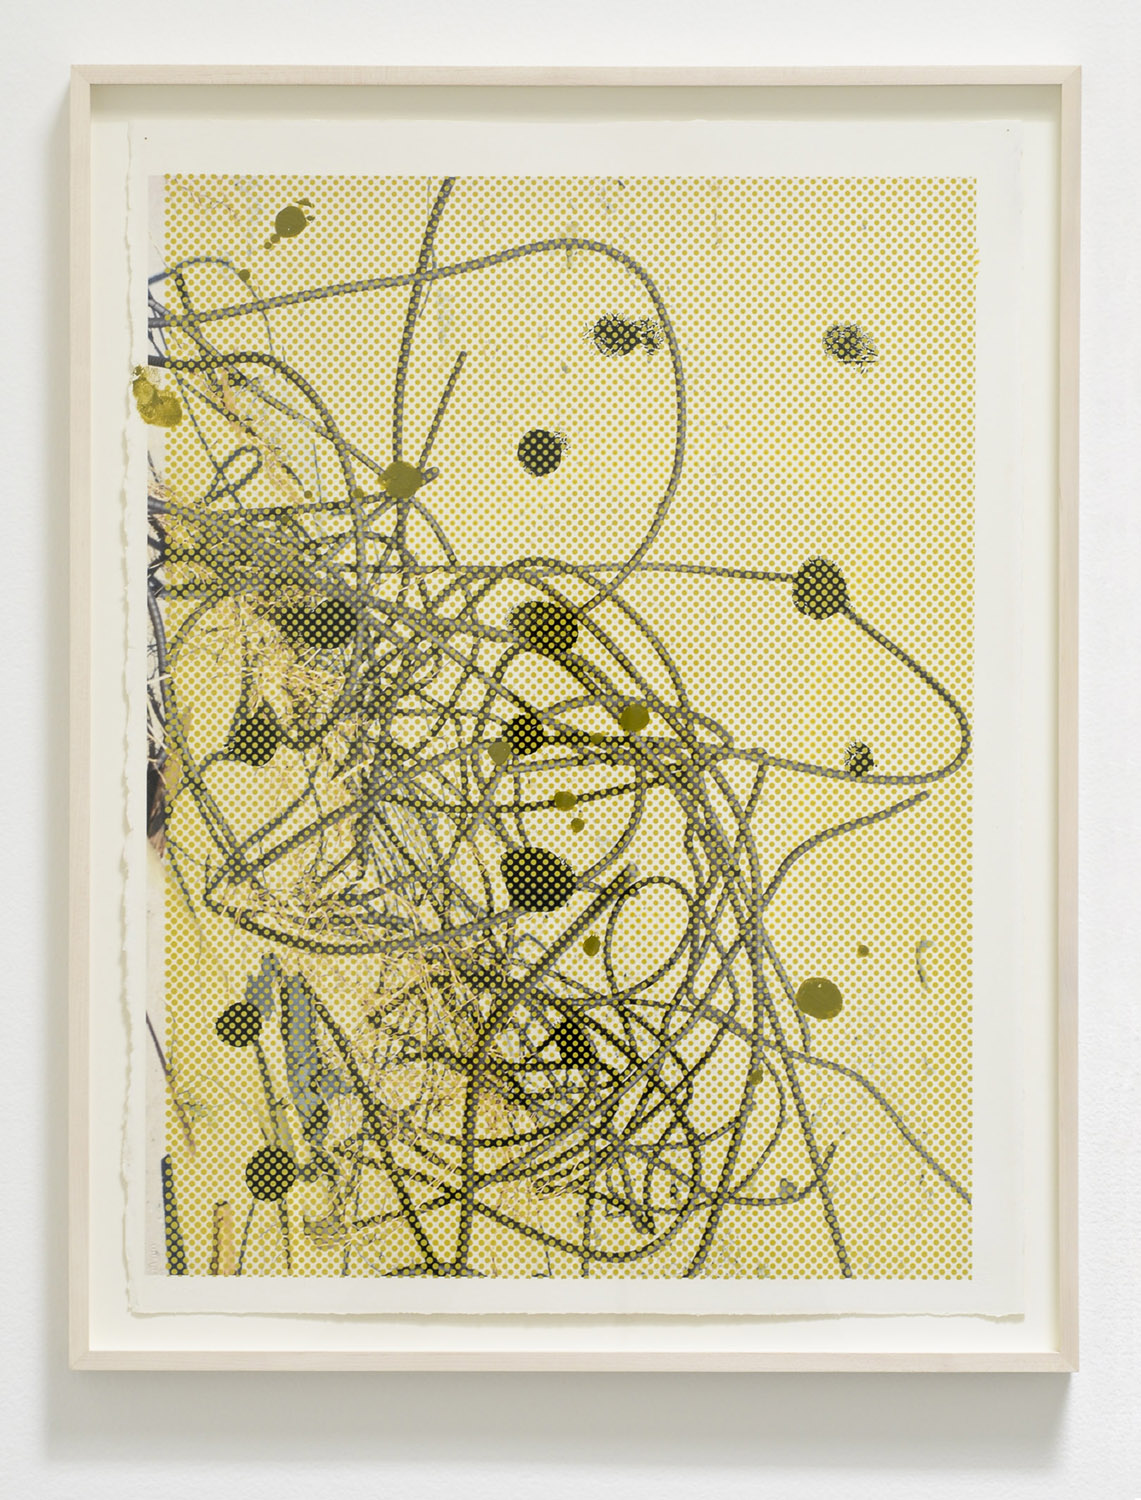  Untitled, 2013  Acrylic and UV cured ink on paper  33 x 25-1/2 inches  83.82 x 64.77 cm       